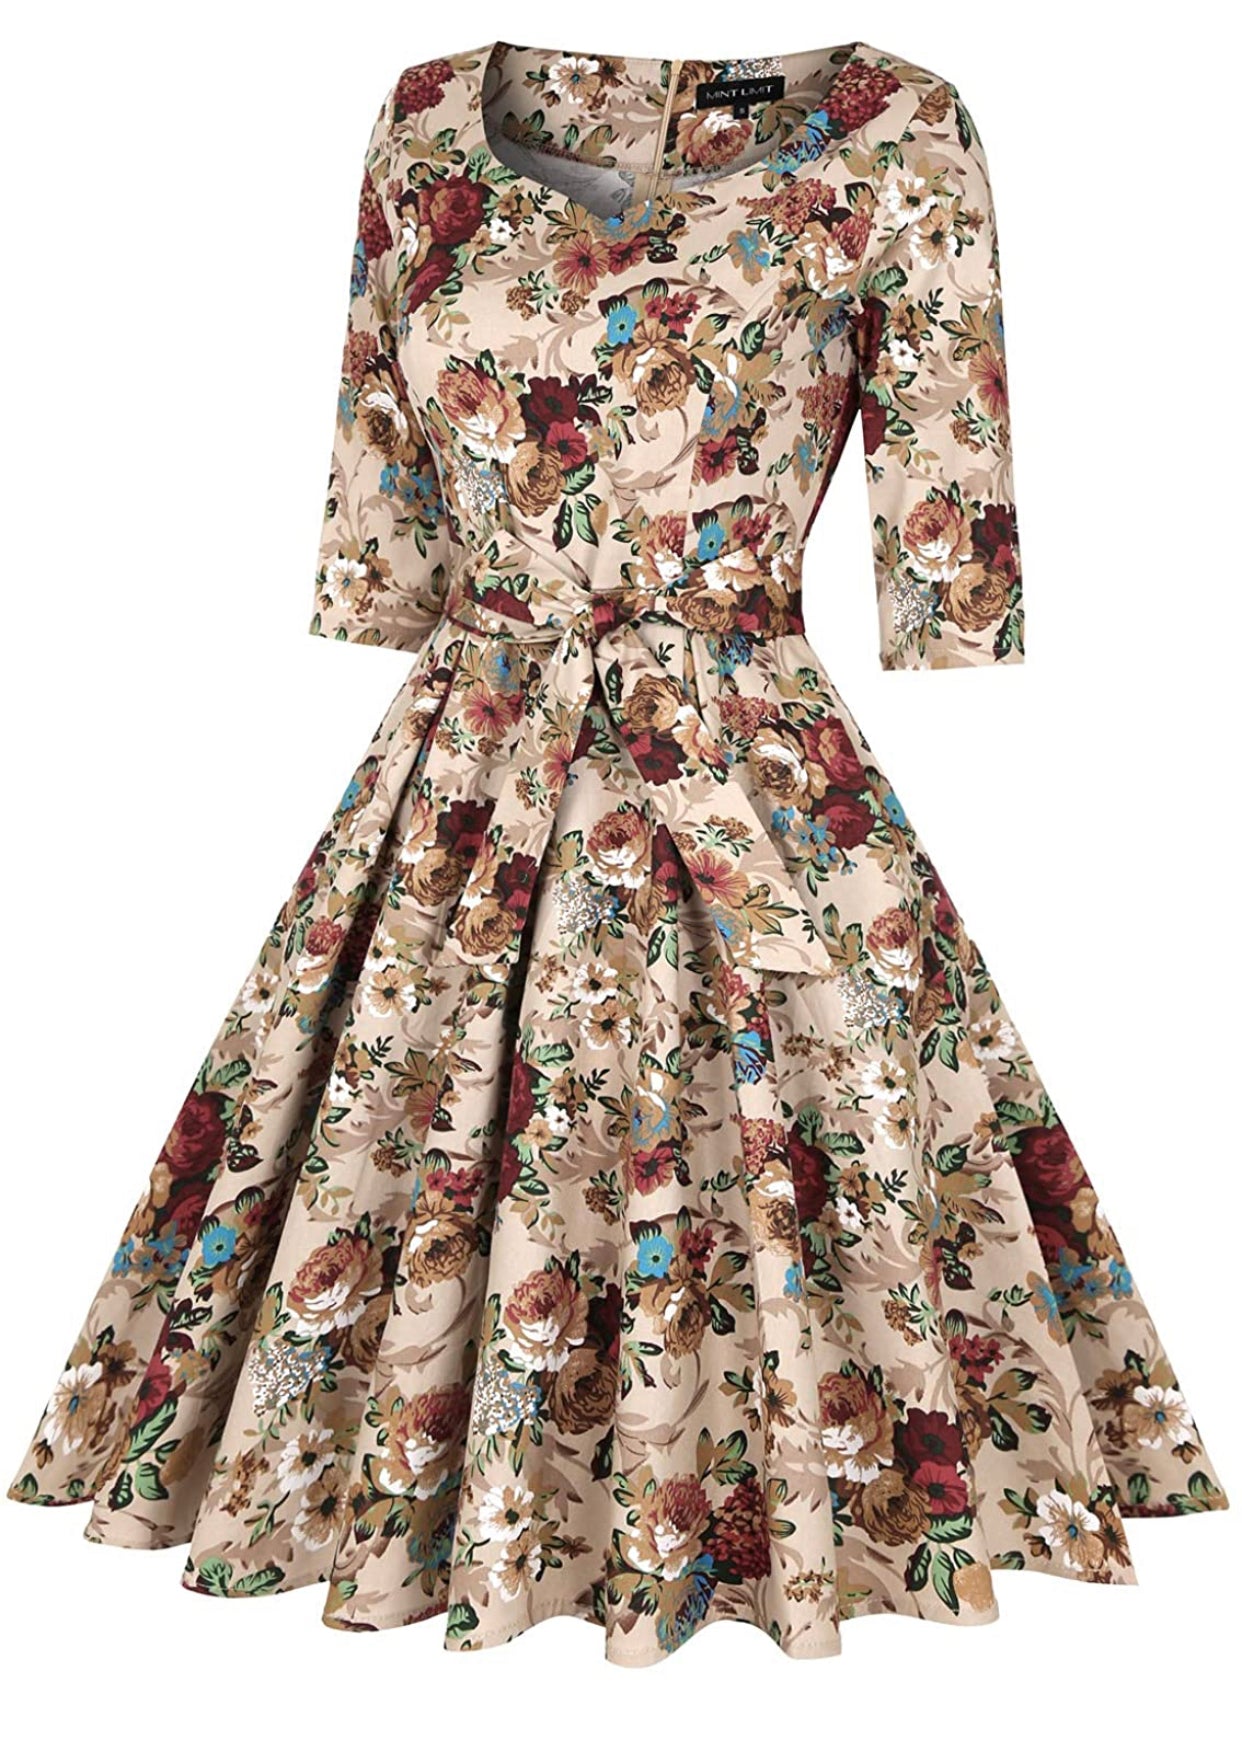 Sweetheart Neckline Rockability Floral Brown Dress, Sizes Small - 2XLarge (US Sized 4 - 22)